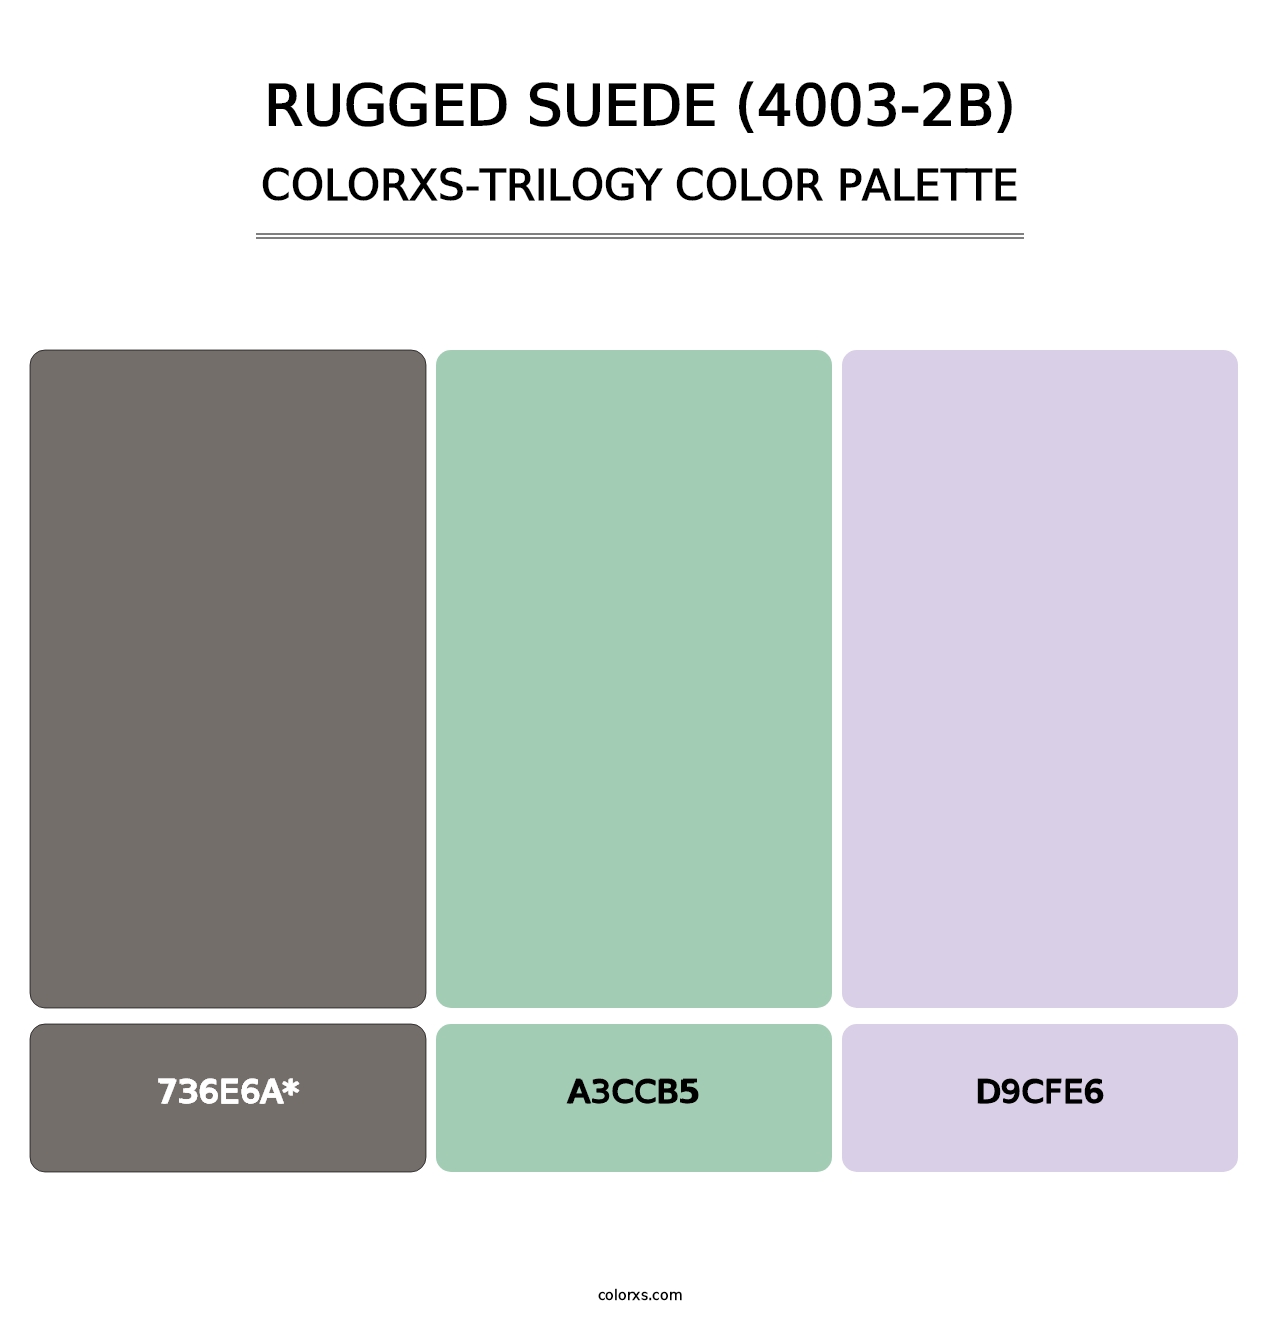 Rugged Suede (4003-2B) - Colorxs Trilogy Palette